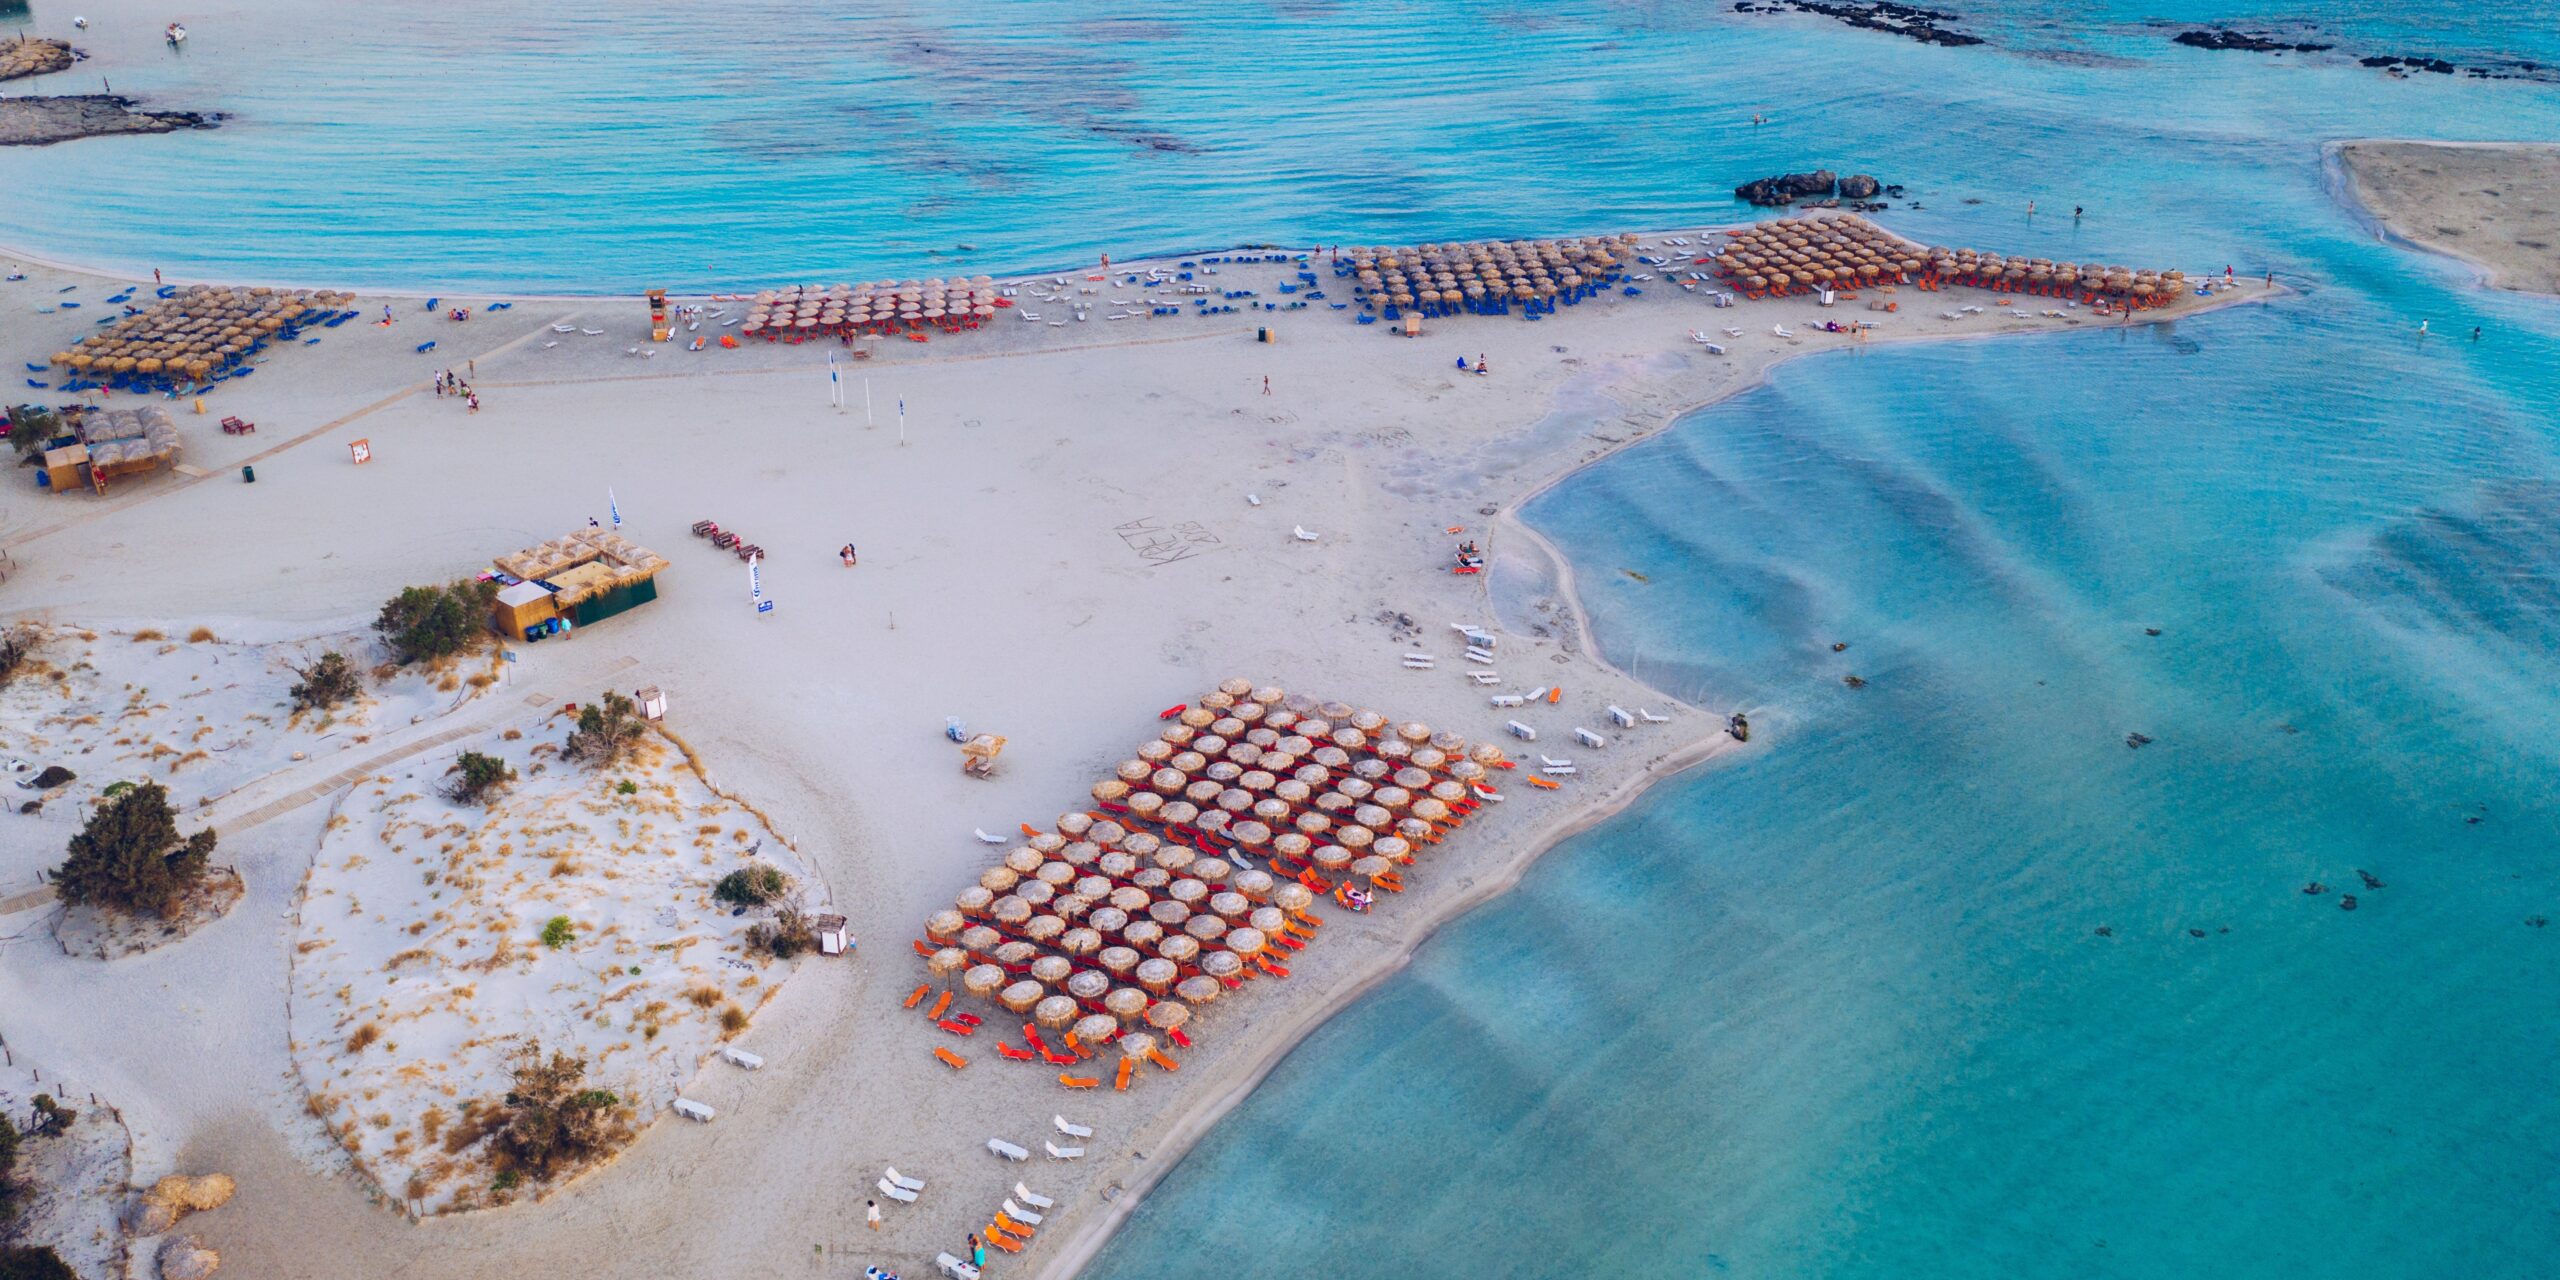 Aerial view of a sandy beach with rows of umbrellas and sun loungers, adjacent to clear blue waters.